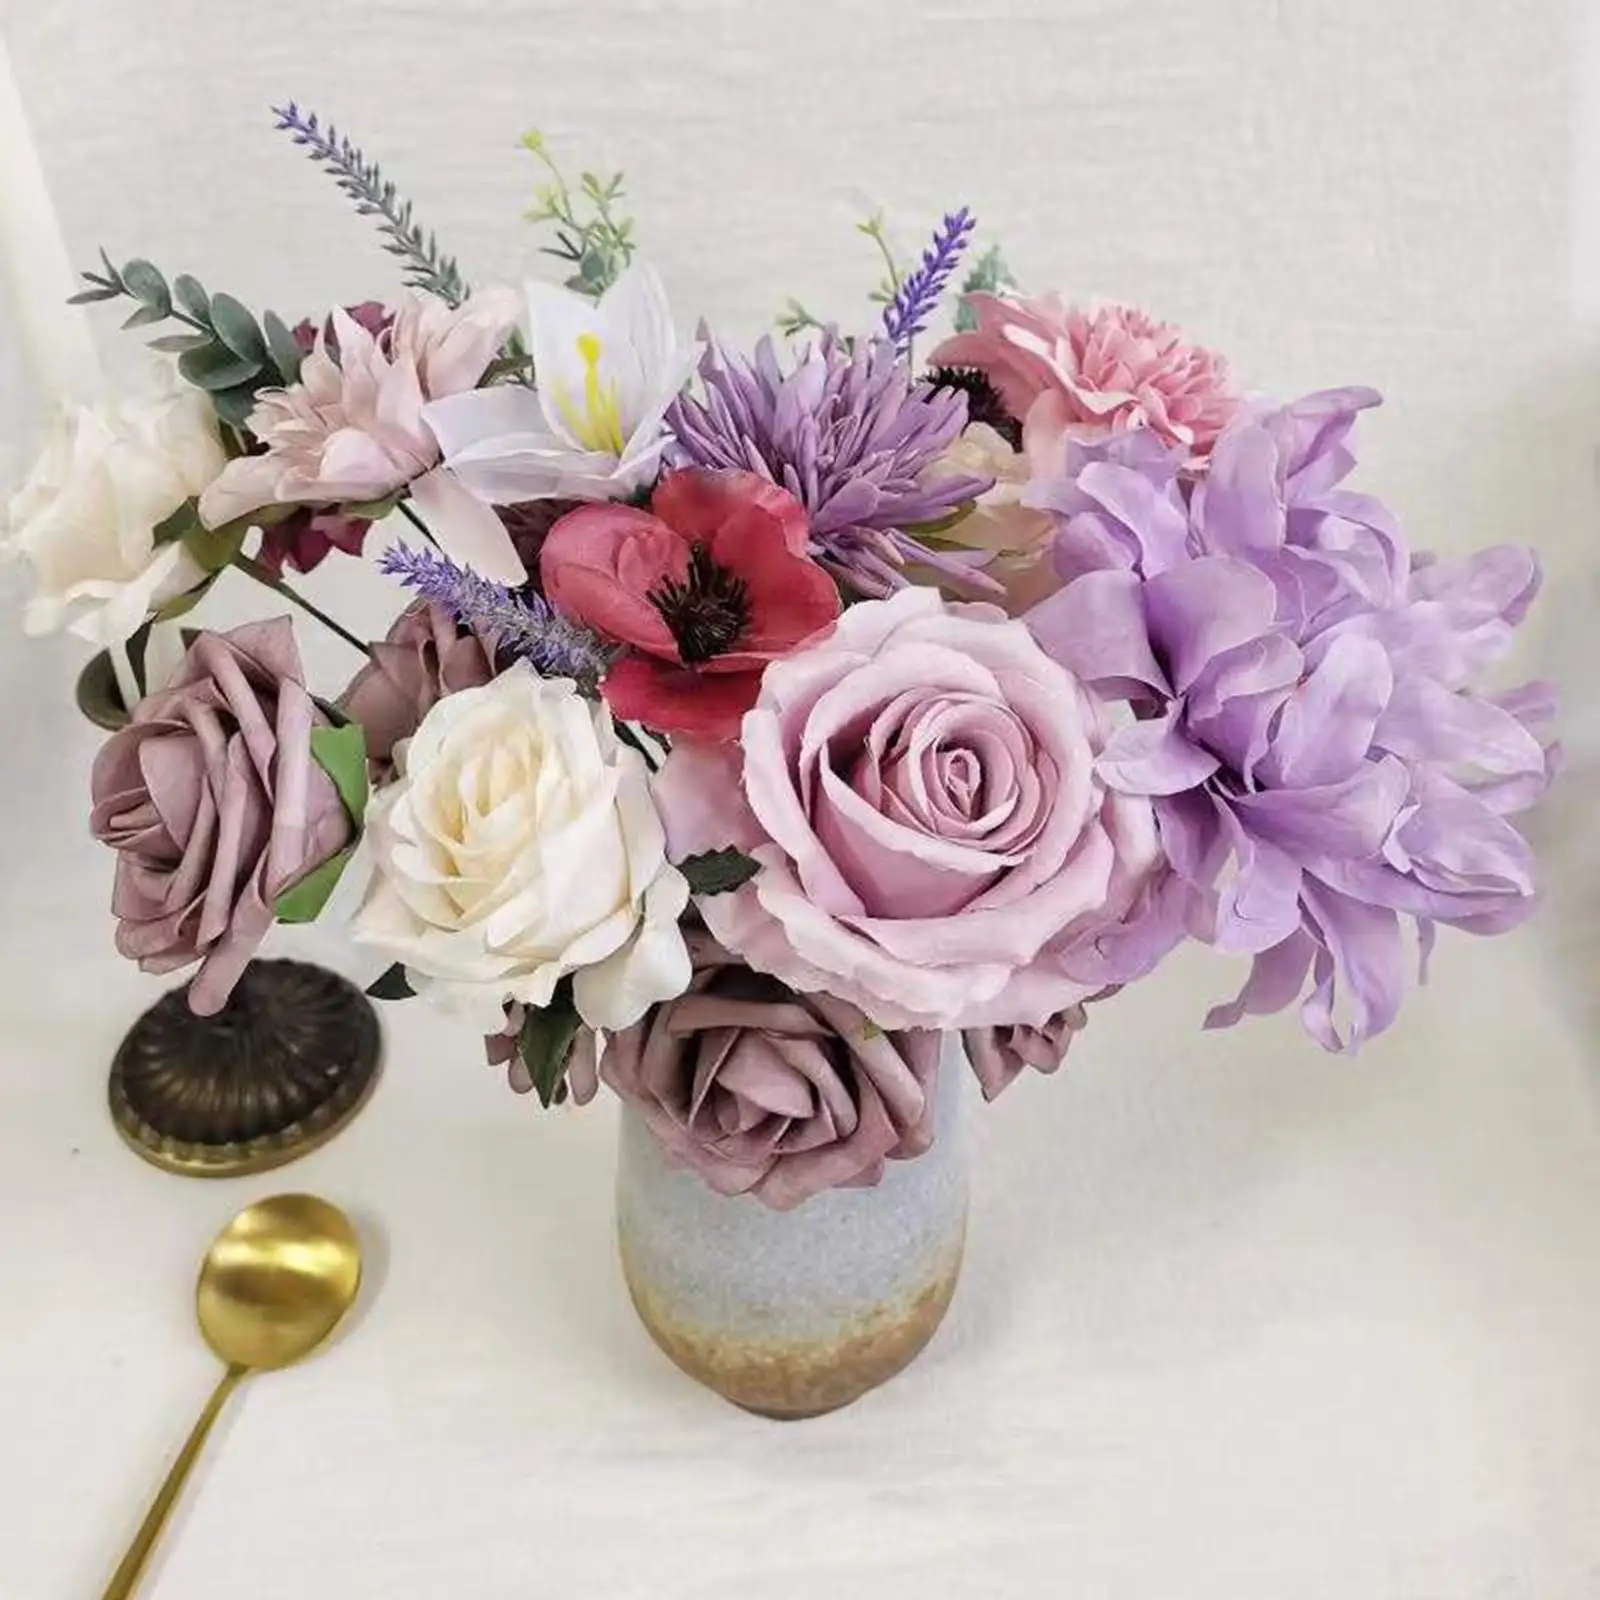 Artificial Flowers Box Valentine Day Gifts DIY Bouquets Anniversary for Table Centerpieces Wedding Girlfriends Wife Lovers